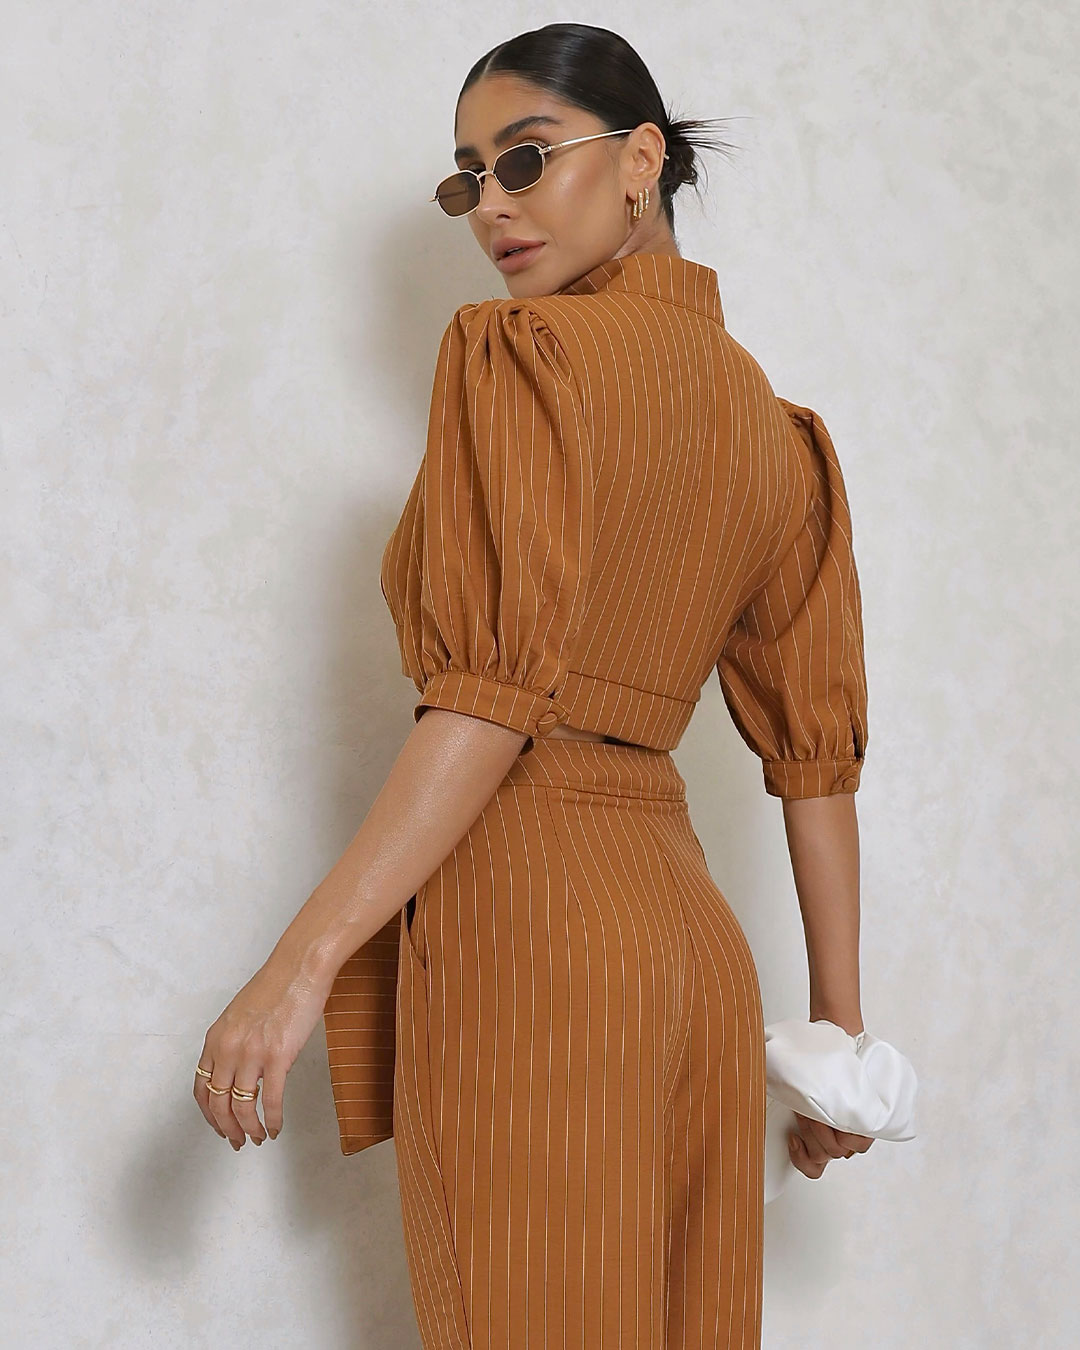 Miss Misses - Miss Misses Cropped Set and Caramel Pinstripe Pants - 80528134